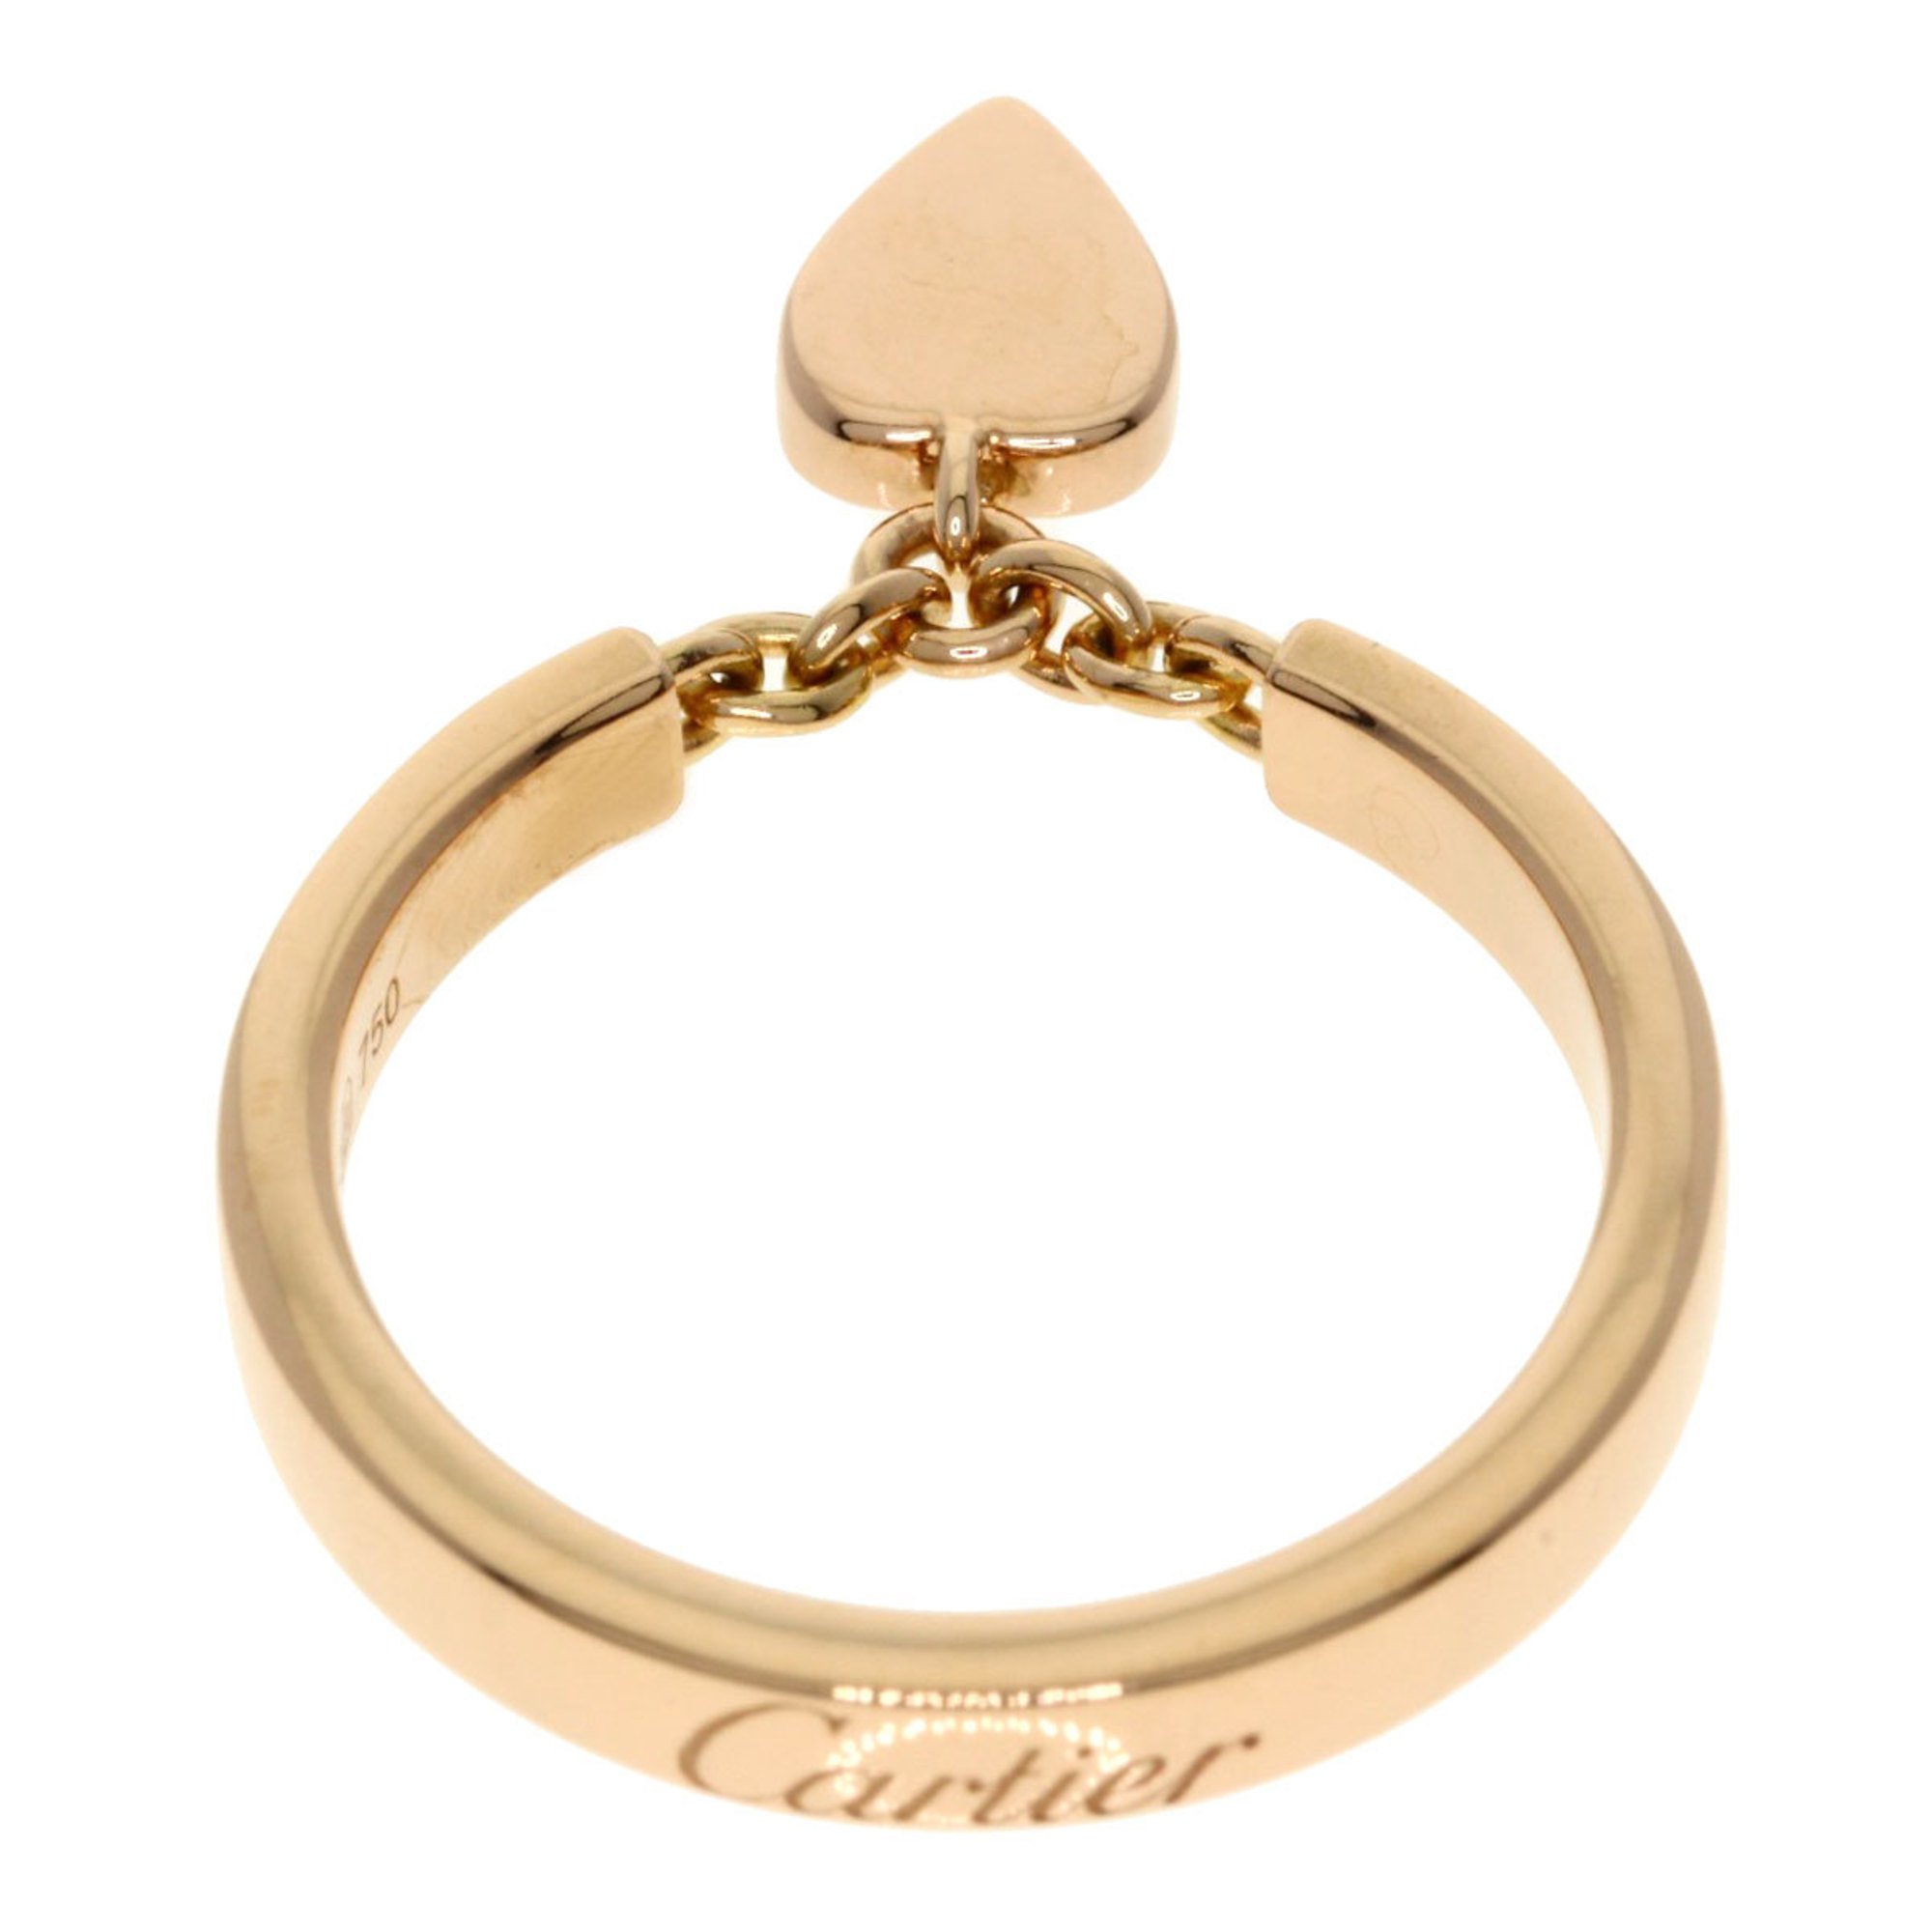 Cartier Mon Amour Ring #49 Ring, 18K Pink Gold, Women's, CARTIER